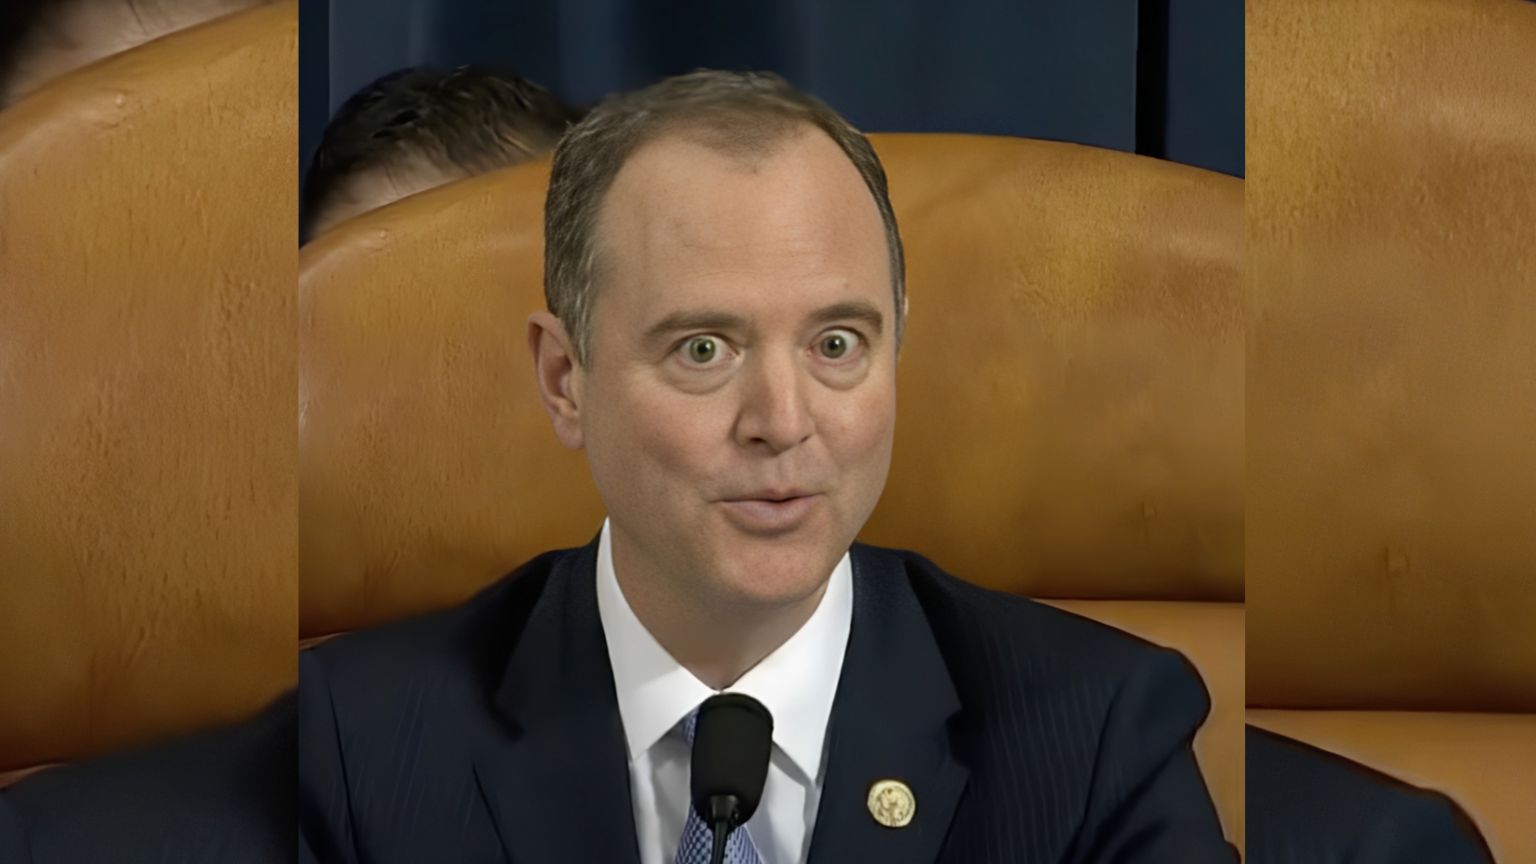 Rep. Adam Schiff’s staffers repeatedly asked Twitter to censor memes